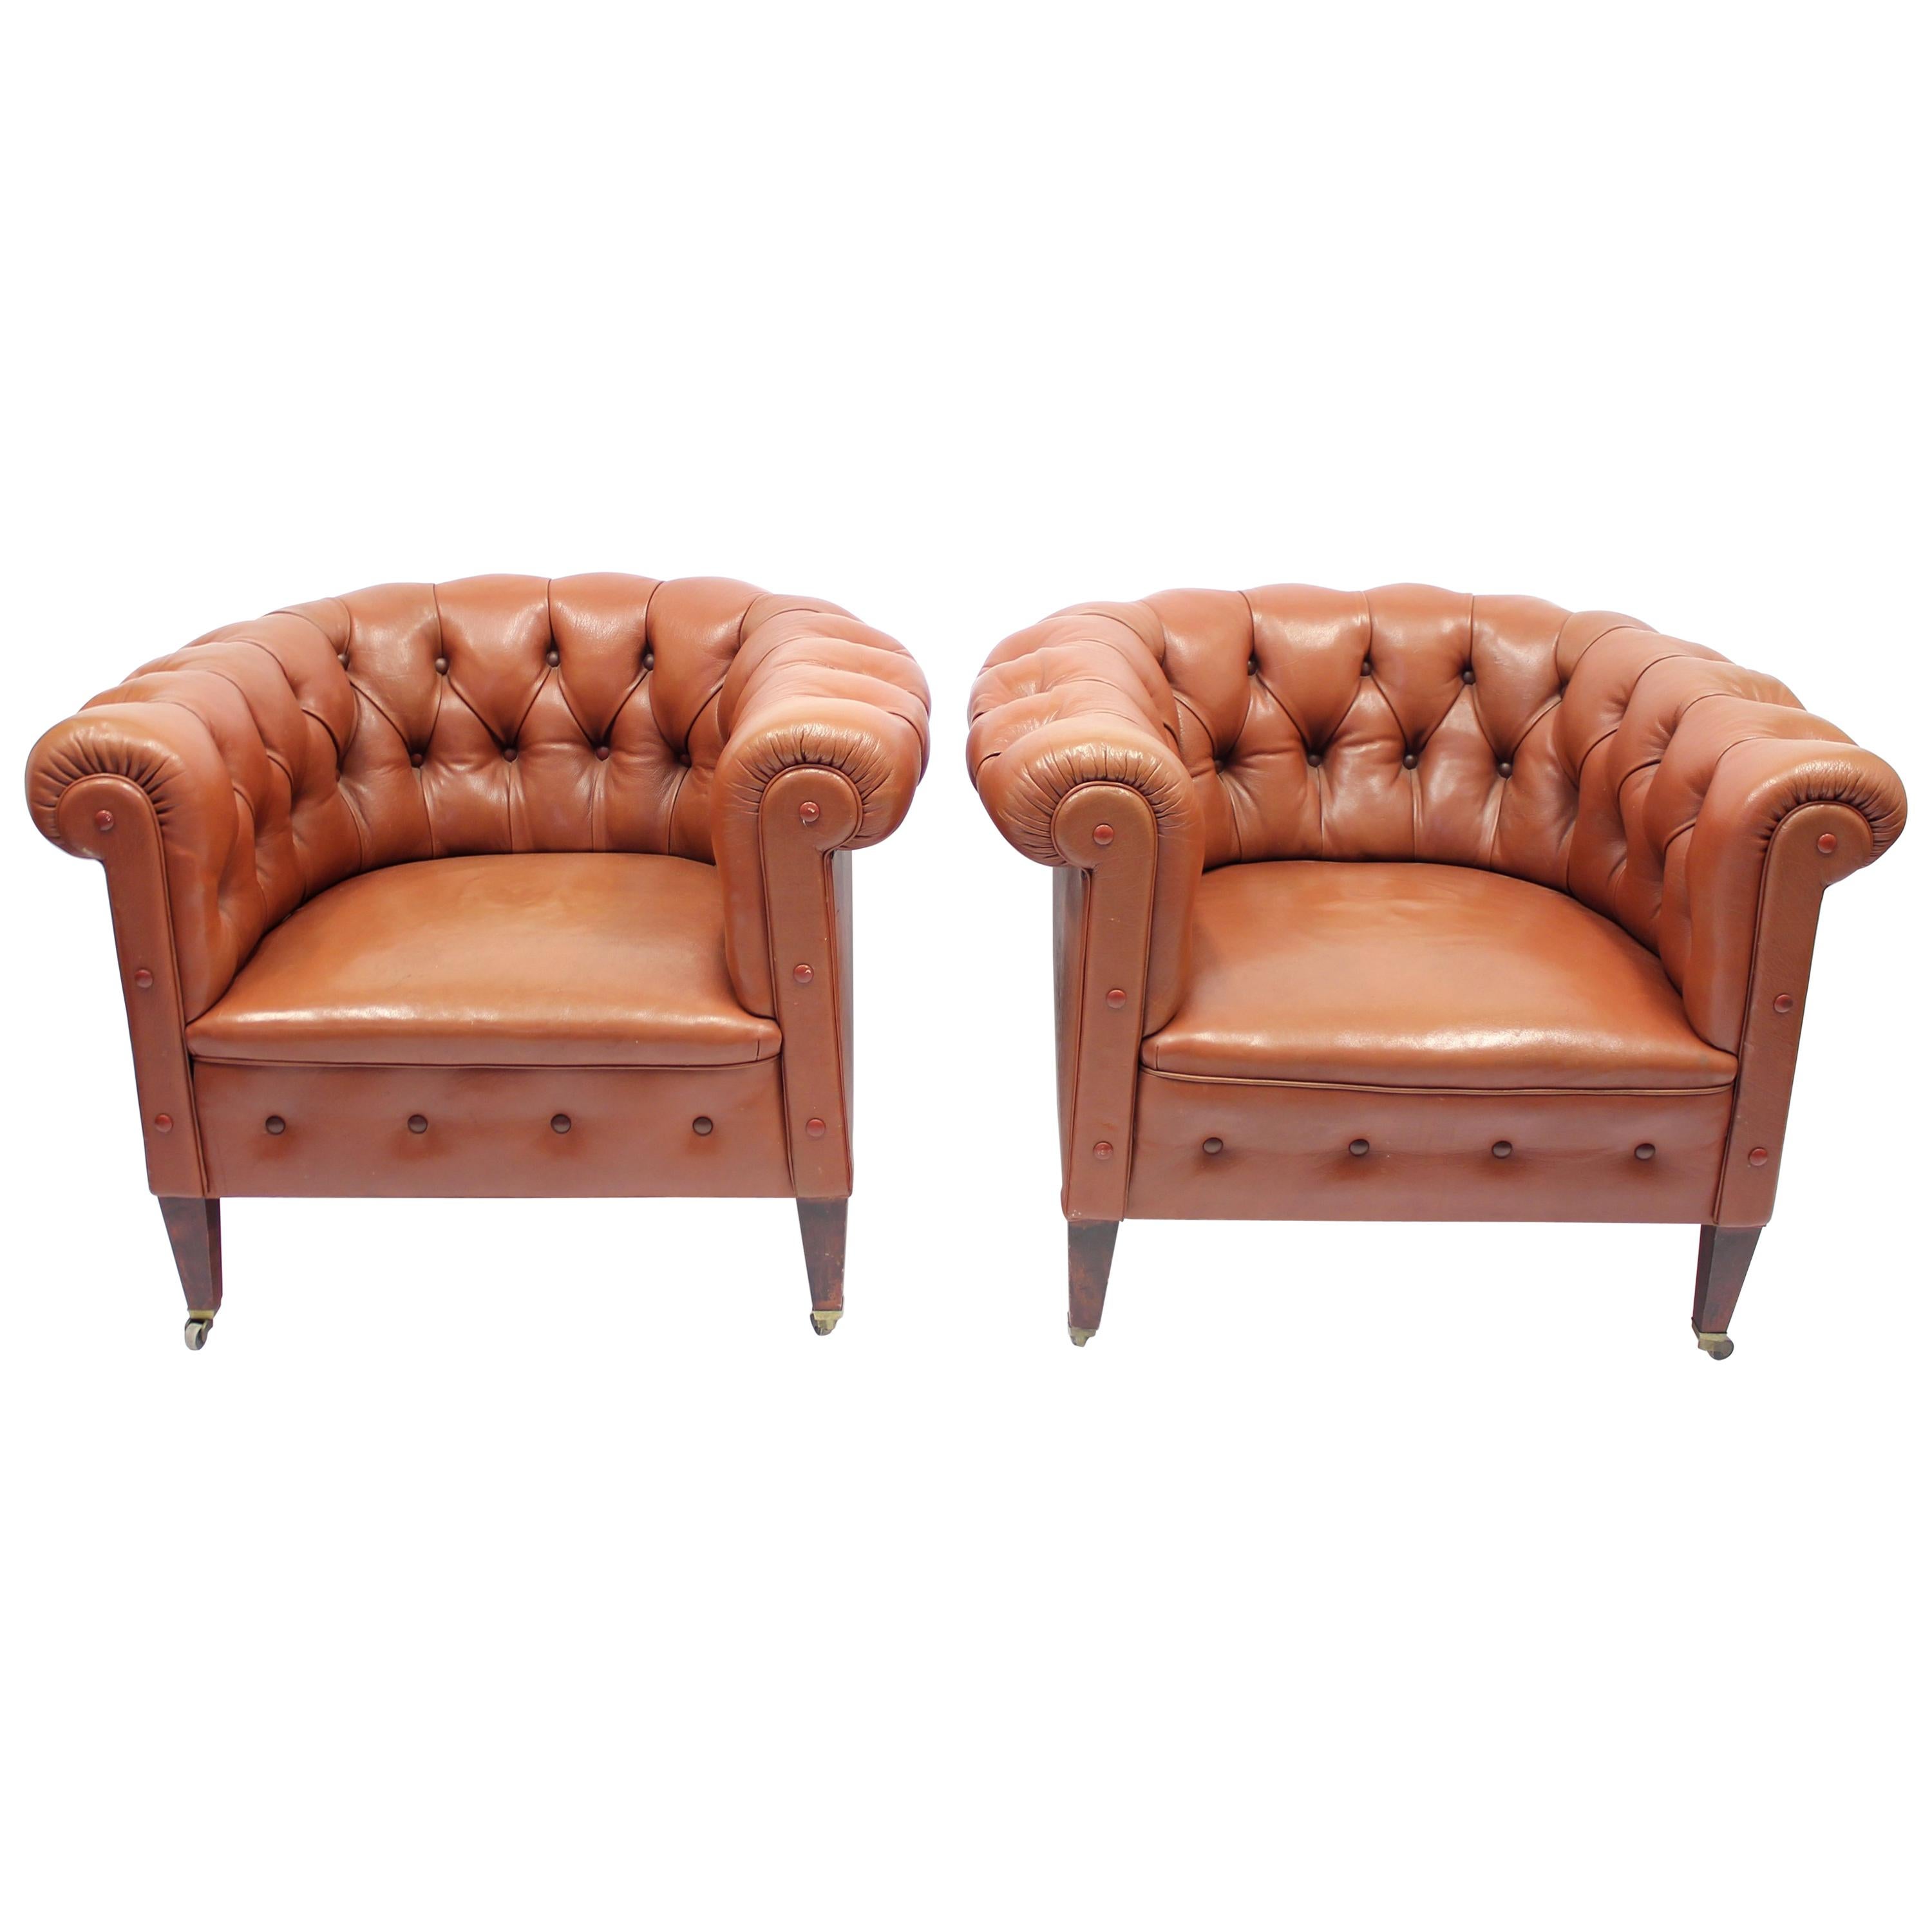 Pair of Chesterfield Club Chairs on Castors, 1940s